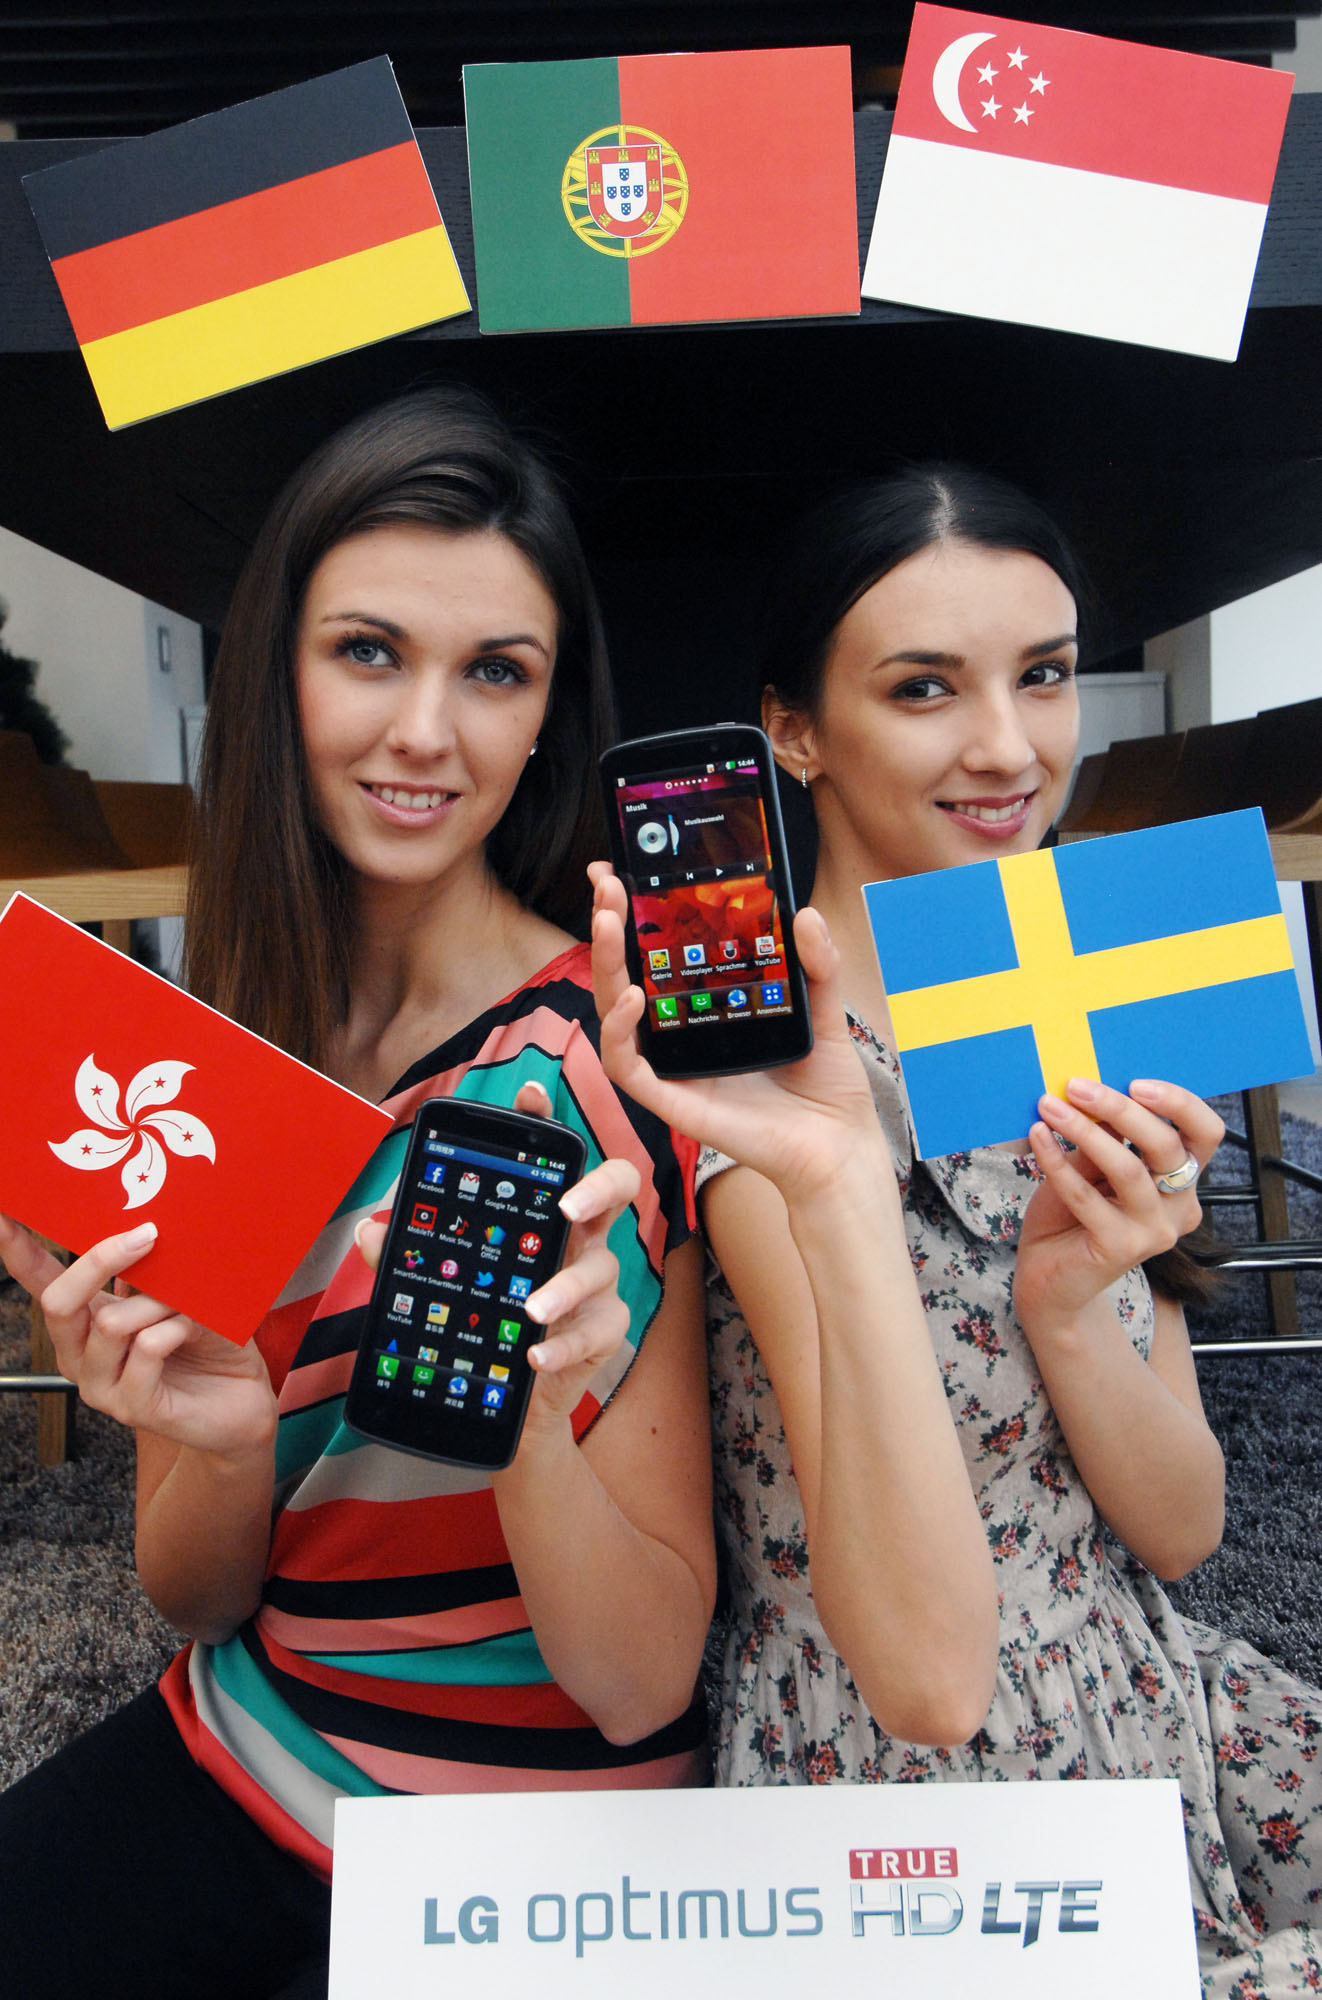 A different view of a model holding a Hong Kong flag and the LG Optimus HD LTE while another holds up the flag of Sweden and another LG Optimus HD LTE, all while in front of the Germany, Portugal and Singapore flags